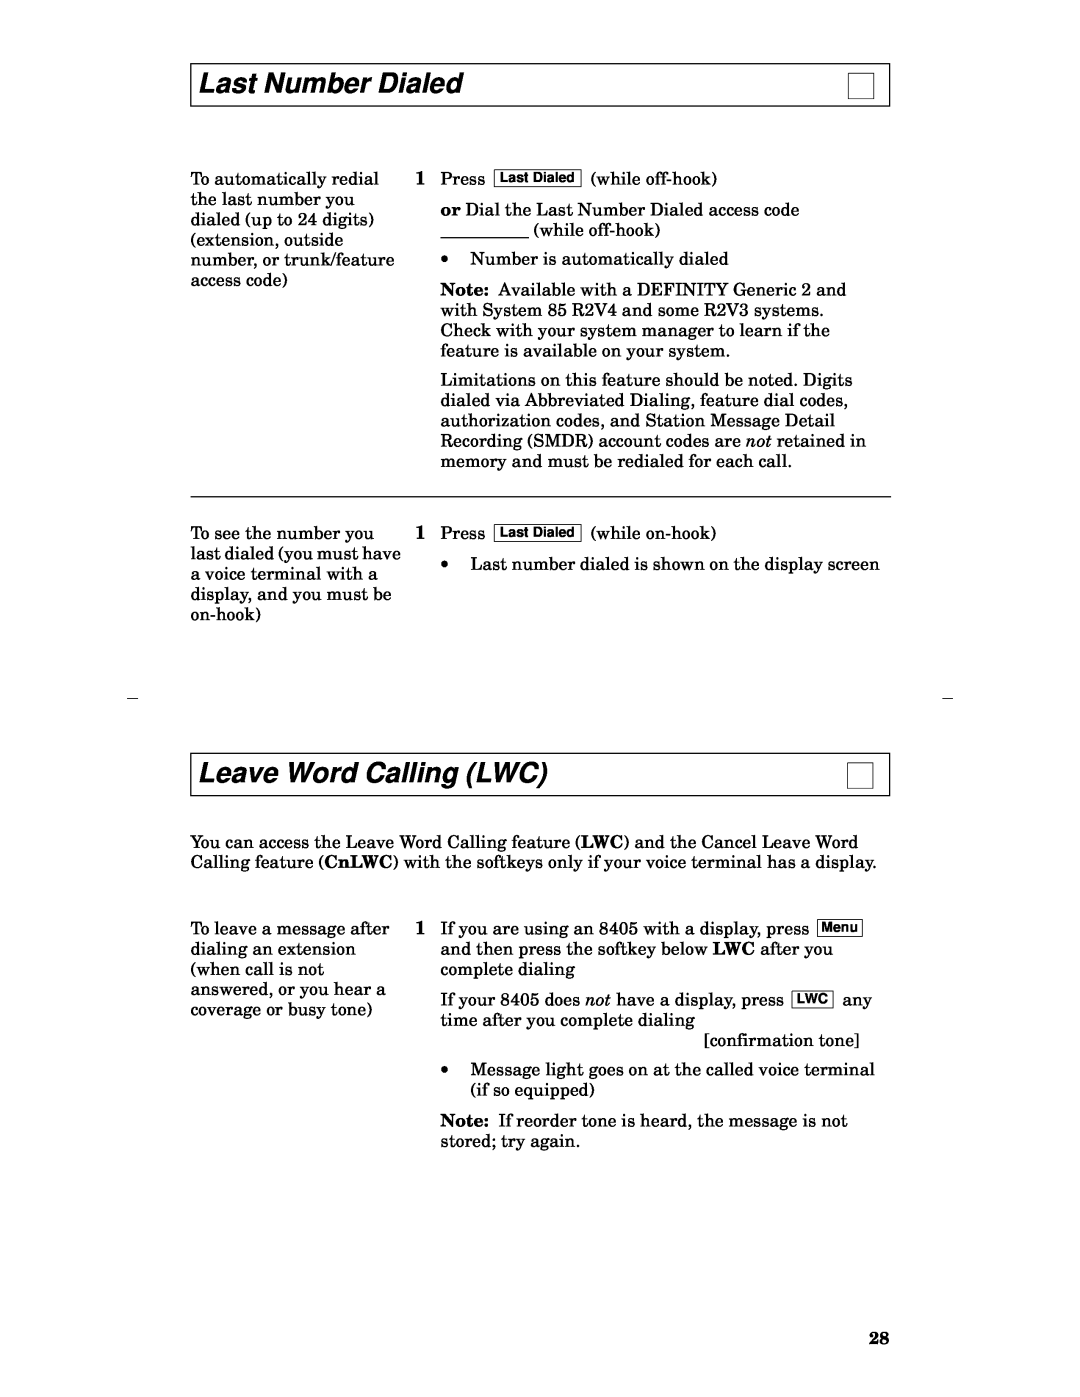 Lucent Technologies 8405 manual Last Number Dialed, Leave Word Calling LWC 